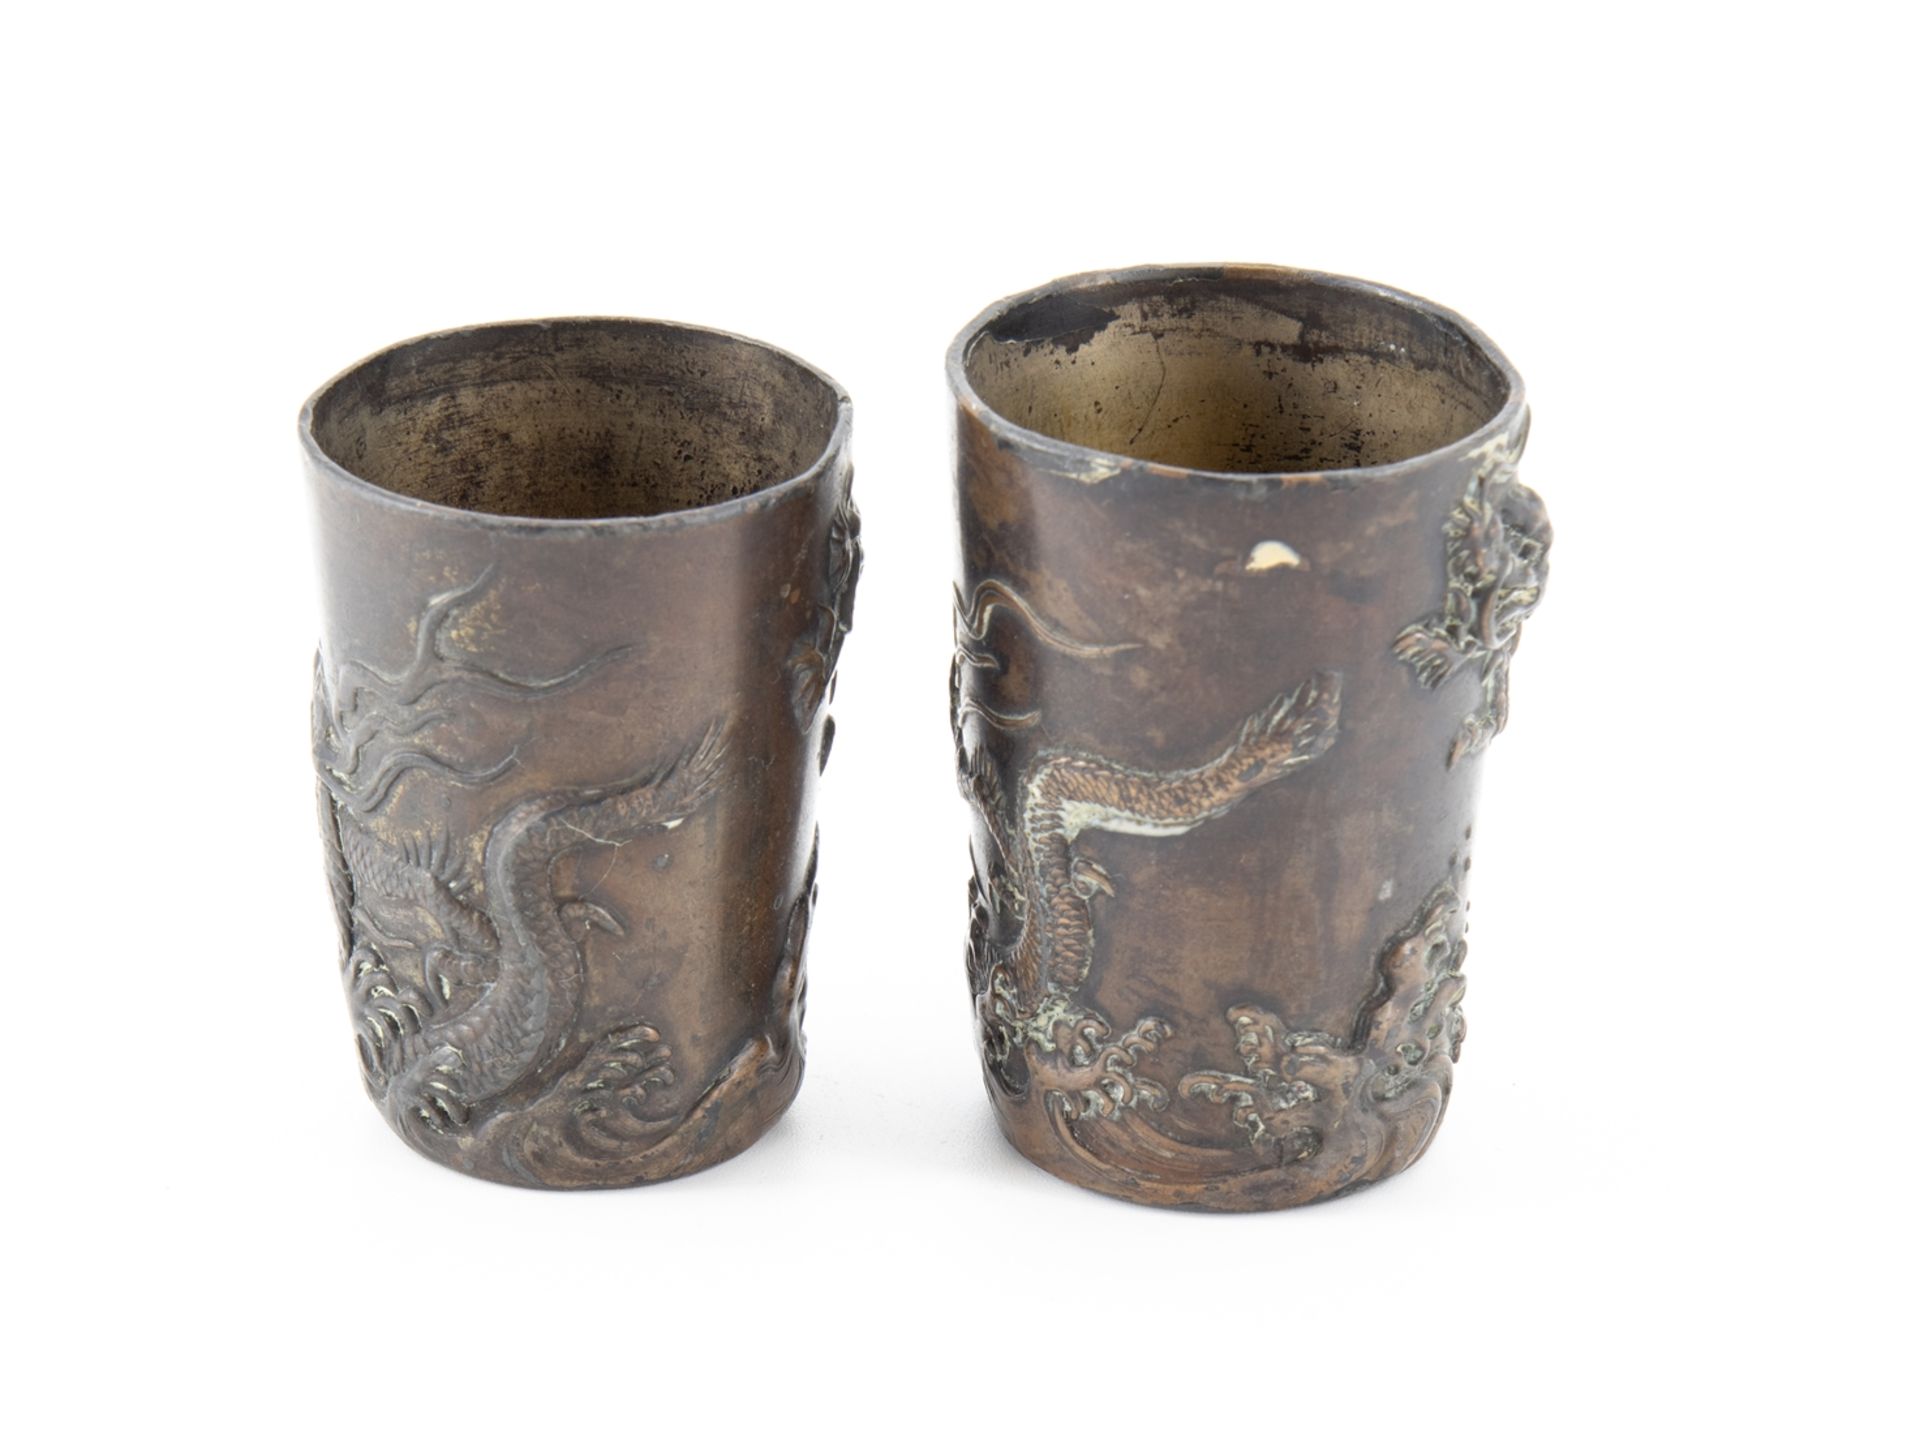 4 cups with dragon motif, China, around 1900 - Image 8 of 12